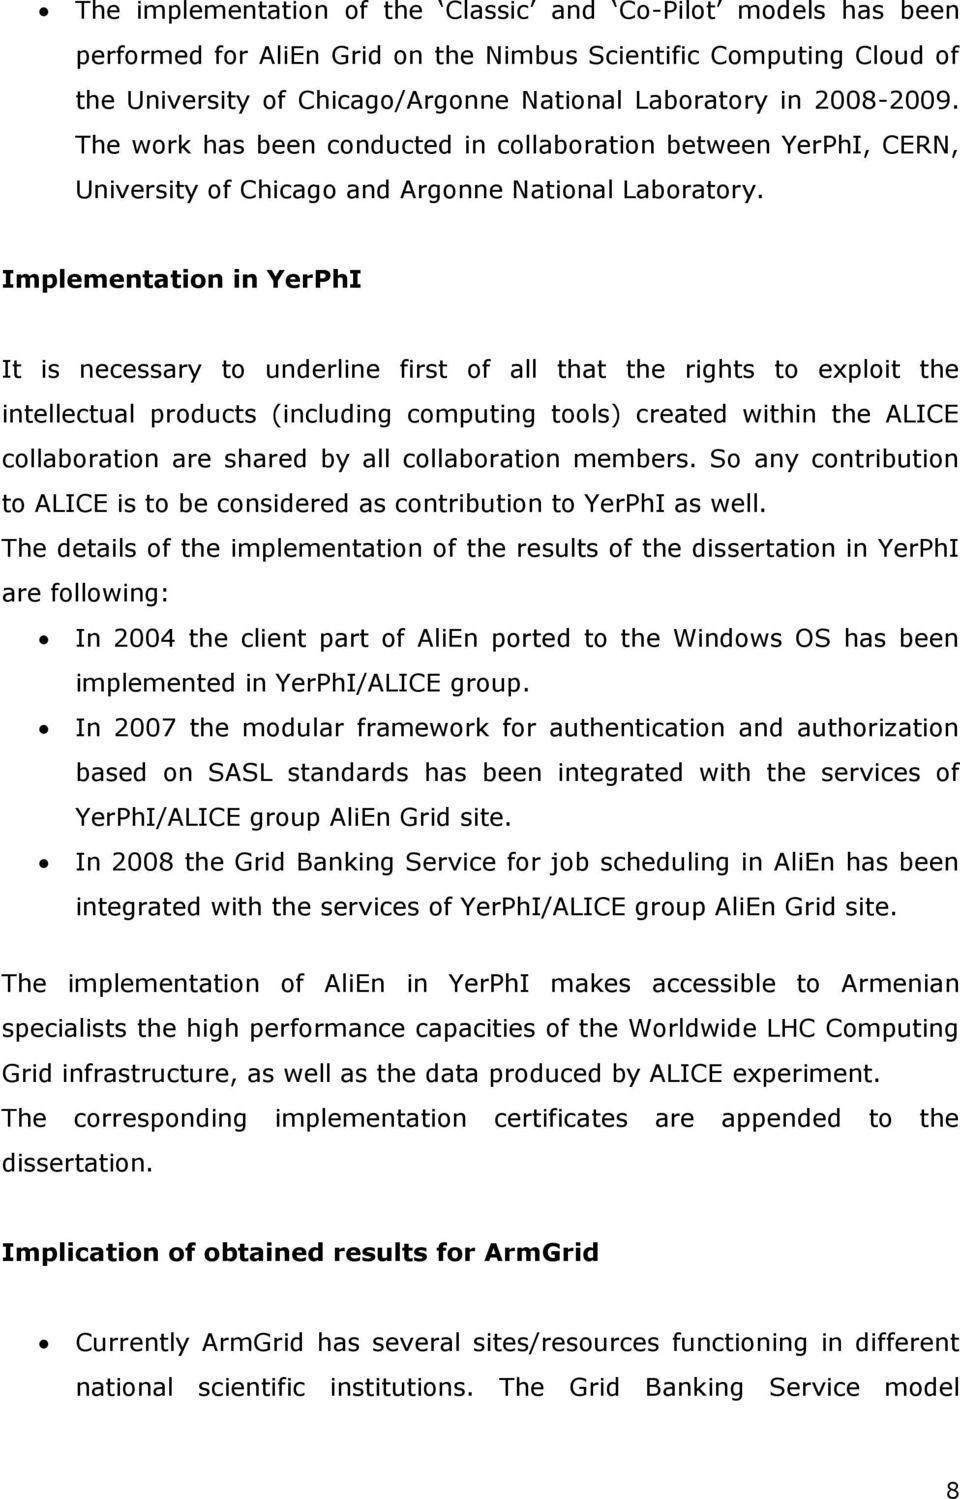 Implementation in YerPhI It is necessary to underline first of all that the rights to exploit the intellectual products (including computing tools) created within the ALICE collaboration are shared